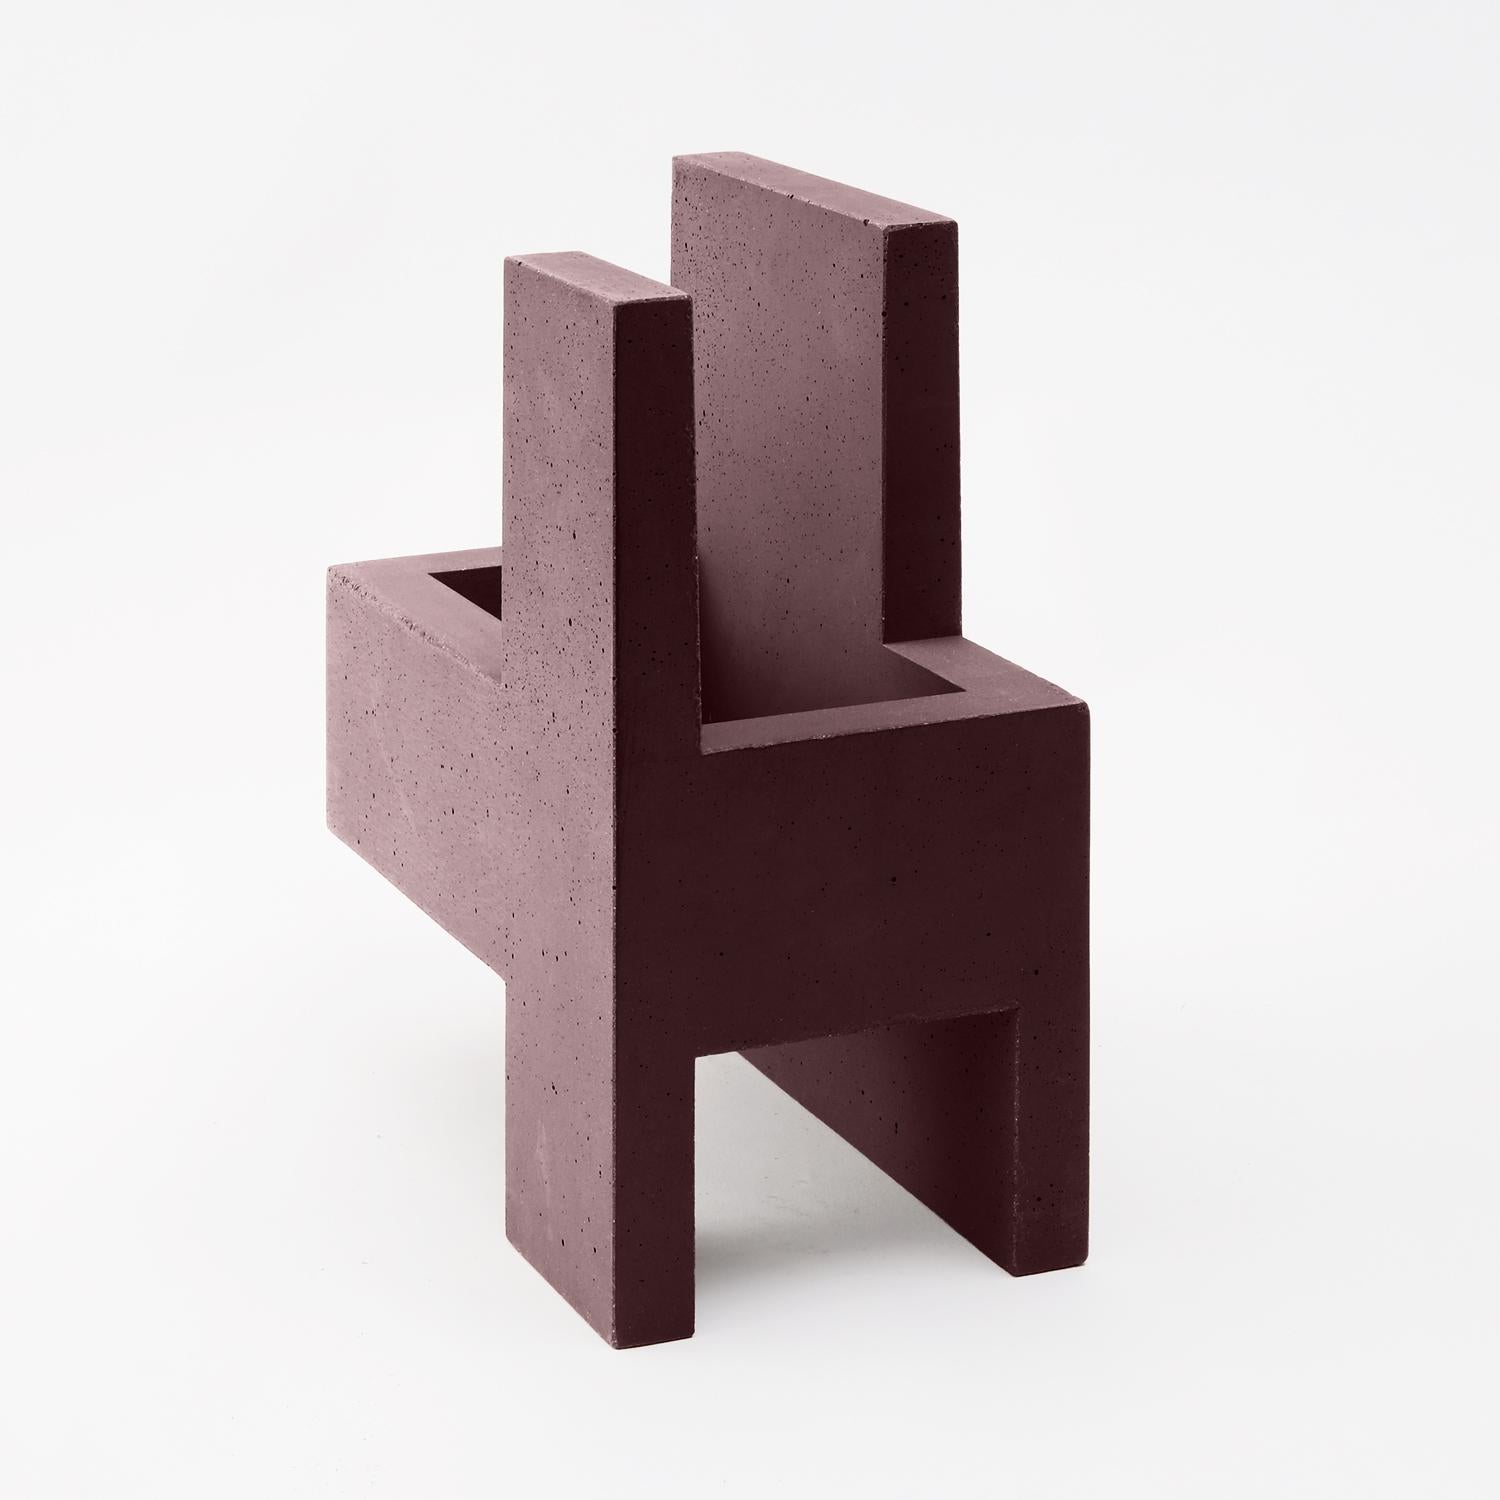 Chandigarh IV - Marsala Brown - Design Vase Paolo Giordano Cement Cast
Chandigarh IV - Marsala Brown

Chandigarh is a collection of vases inspired by the homonym city designed by Le Corbusier, who imagined and created it from nothing in India. The